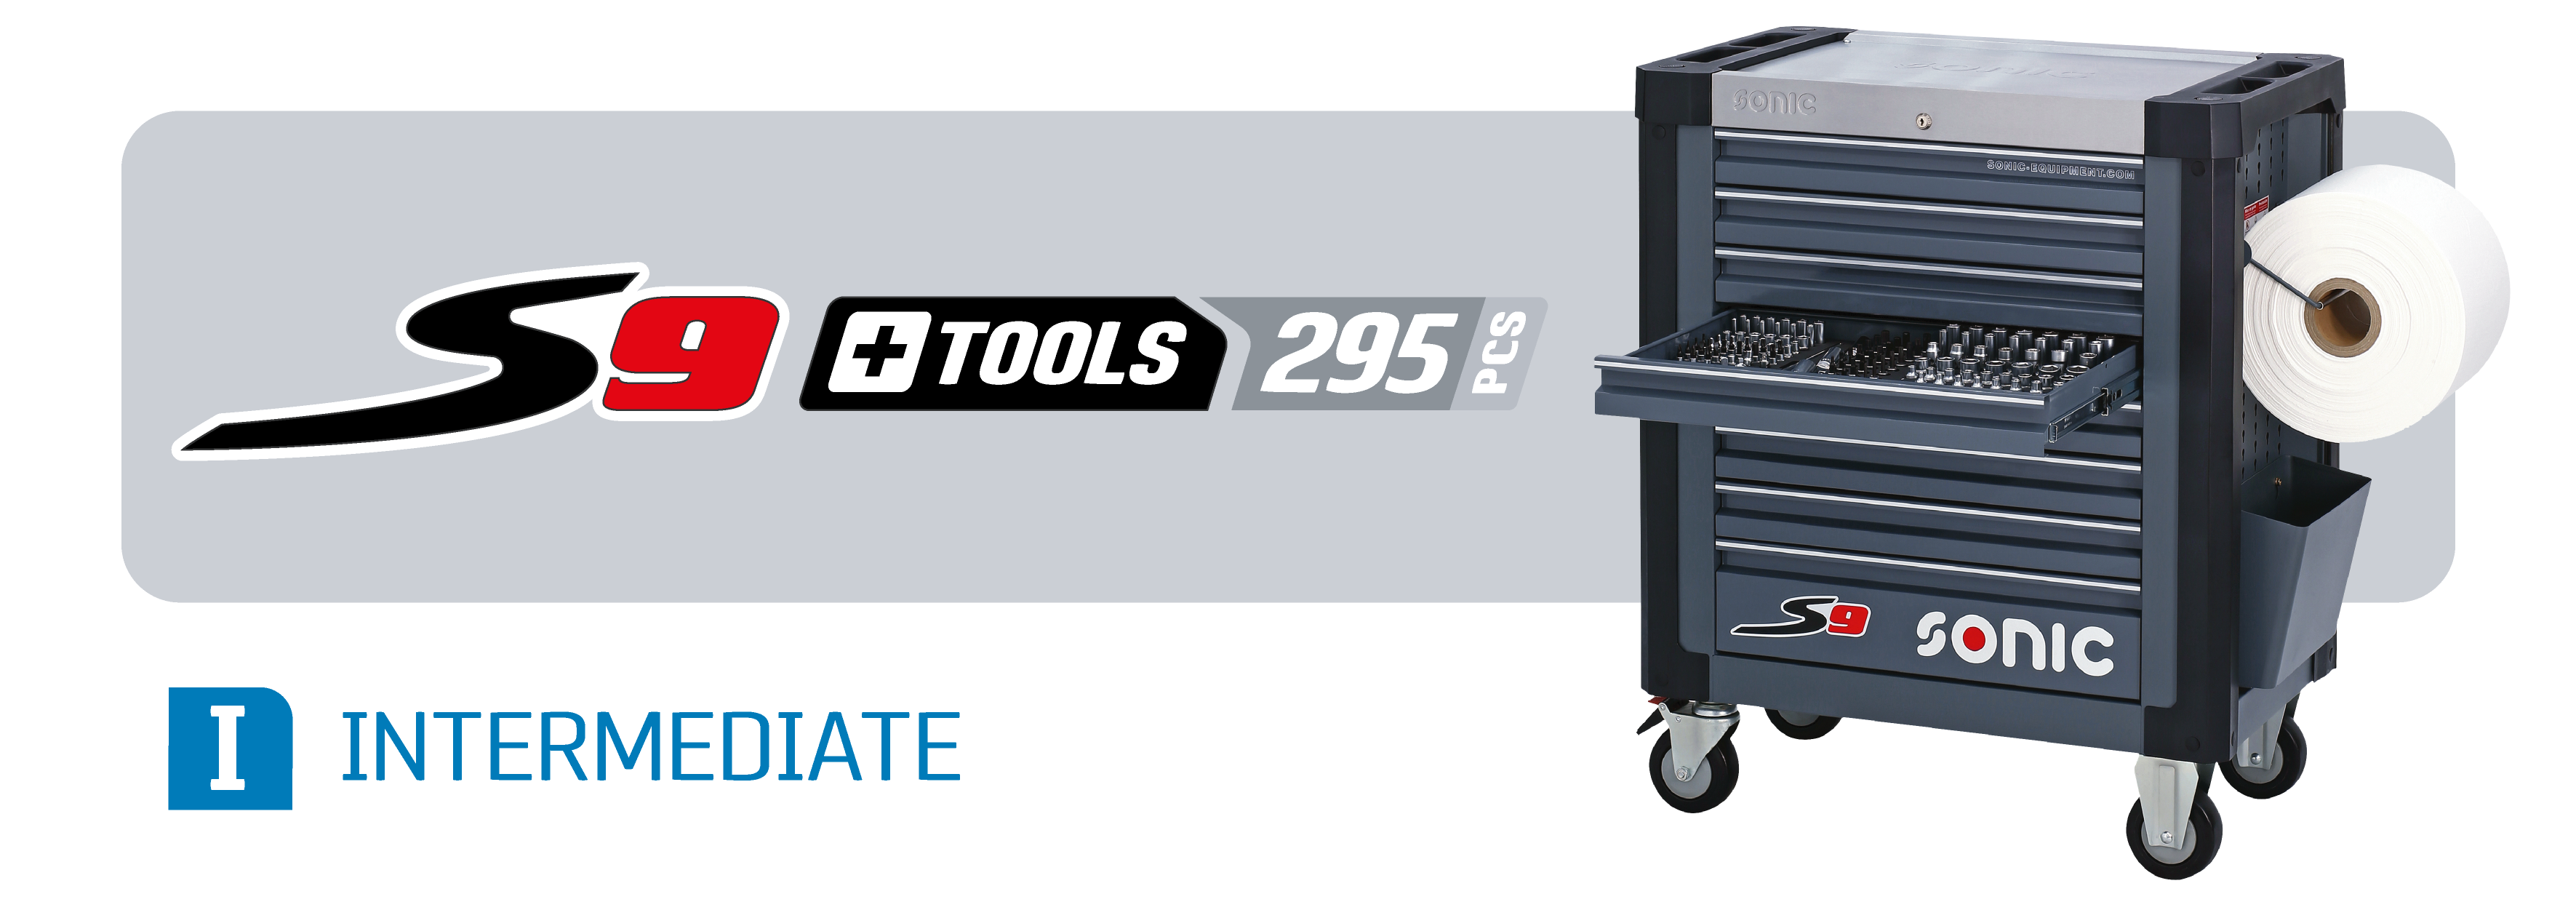 S9 toolbox with tools